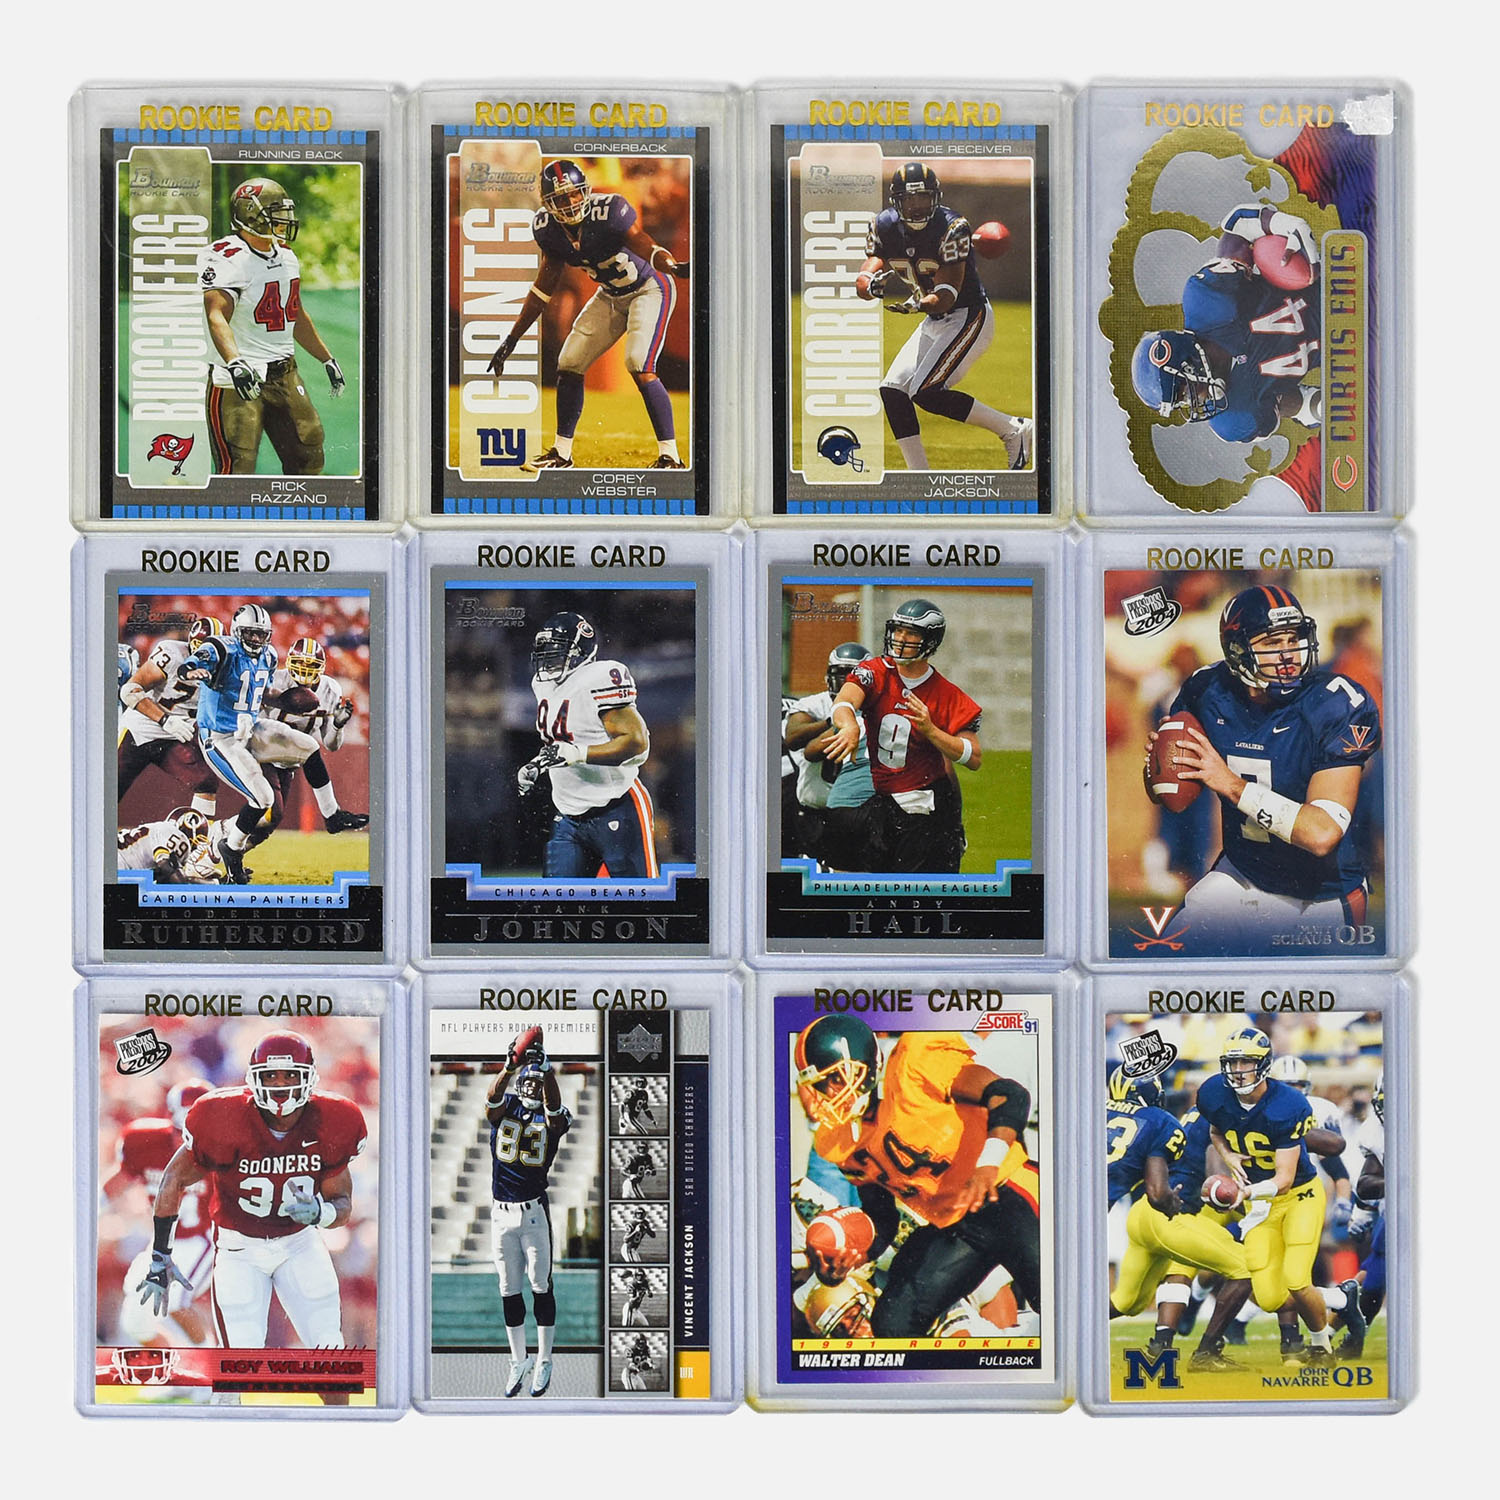 Twelve 1990s to 2000s Era NFL Rookie Football Cards with Extra 800 Mint Cards